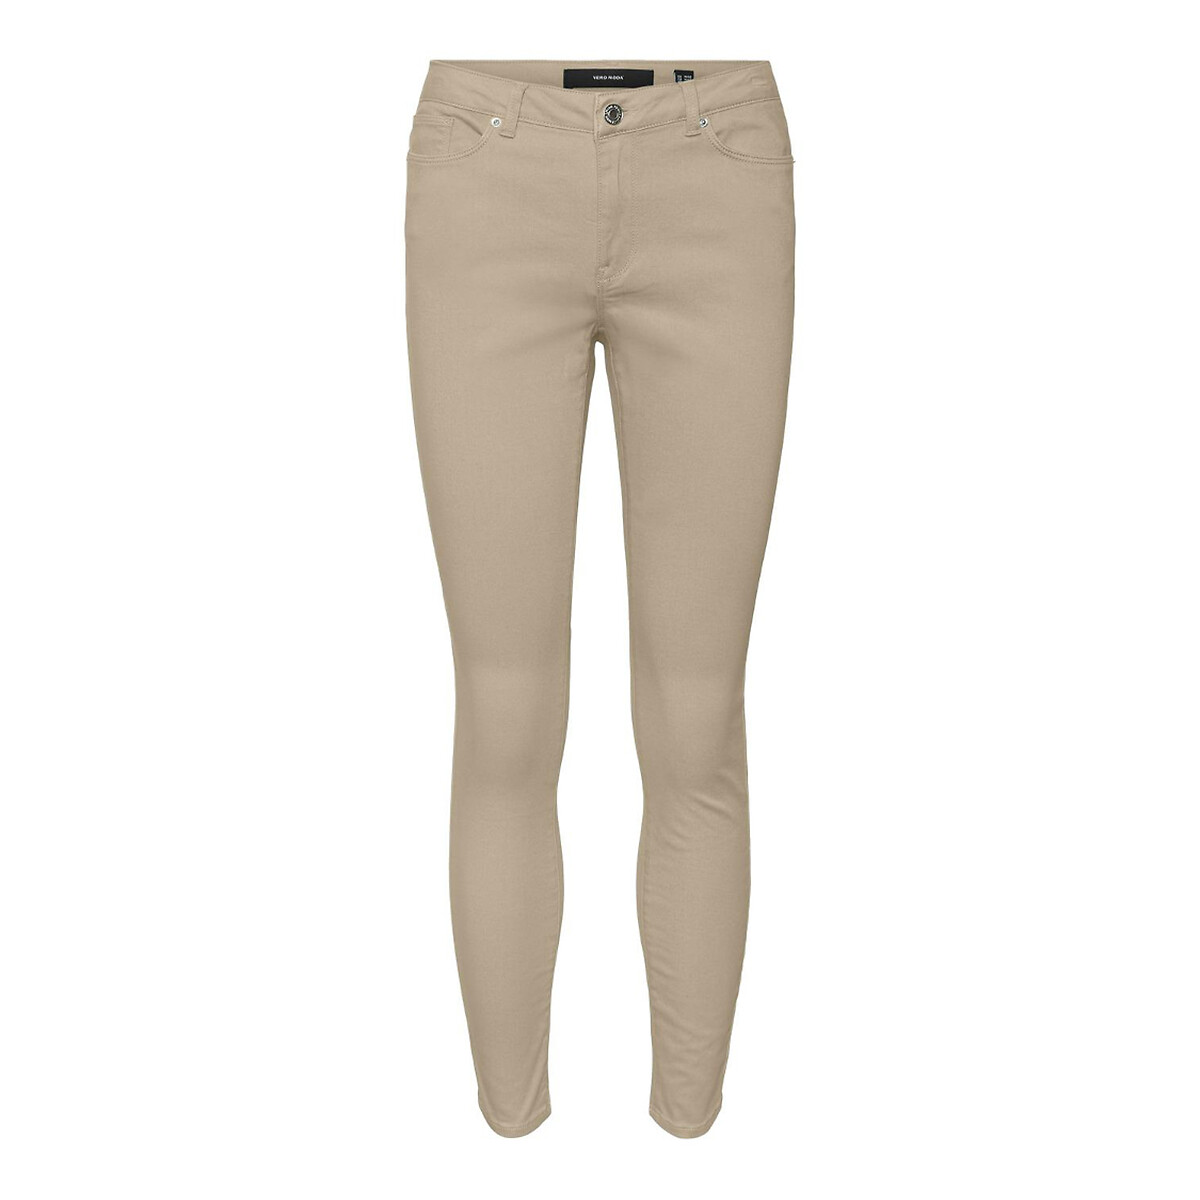 cotton mix trousers in slim fit